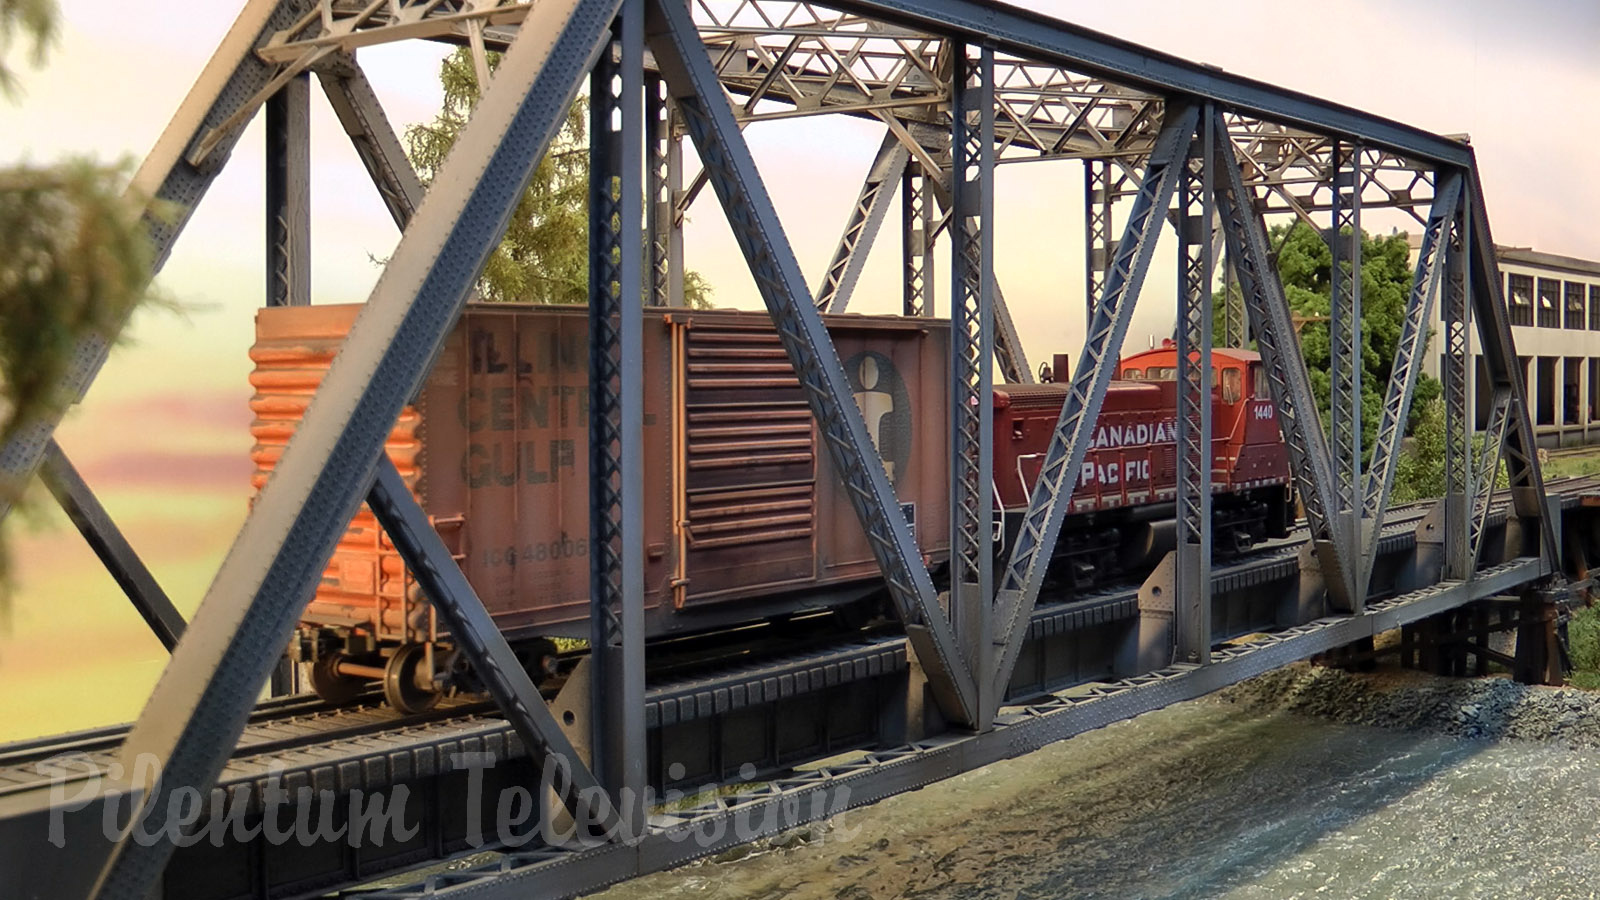 Model Railway Layout in O Scale - Shunting Operations on the Arbutus Corridor in Canada